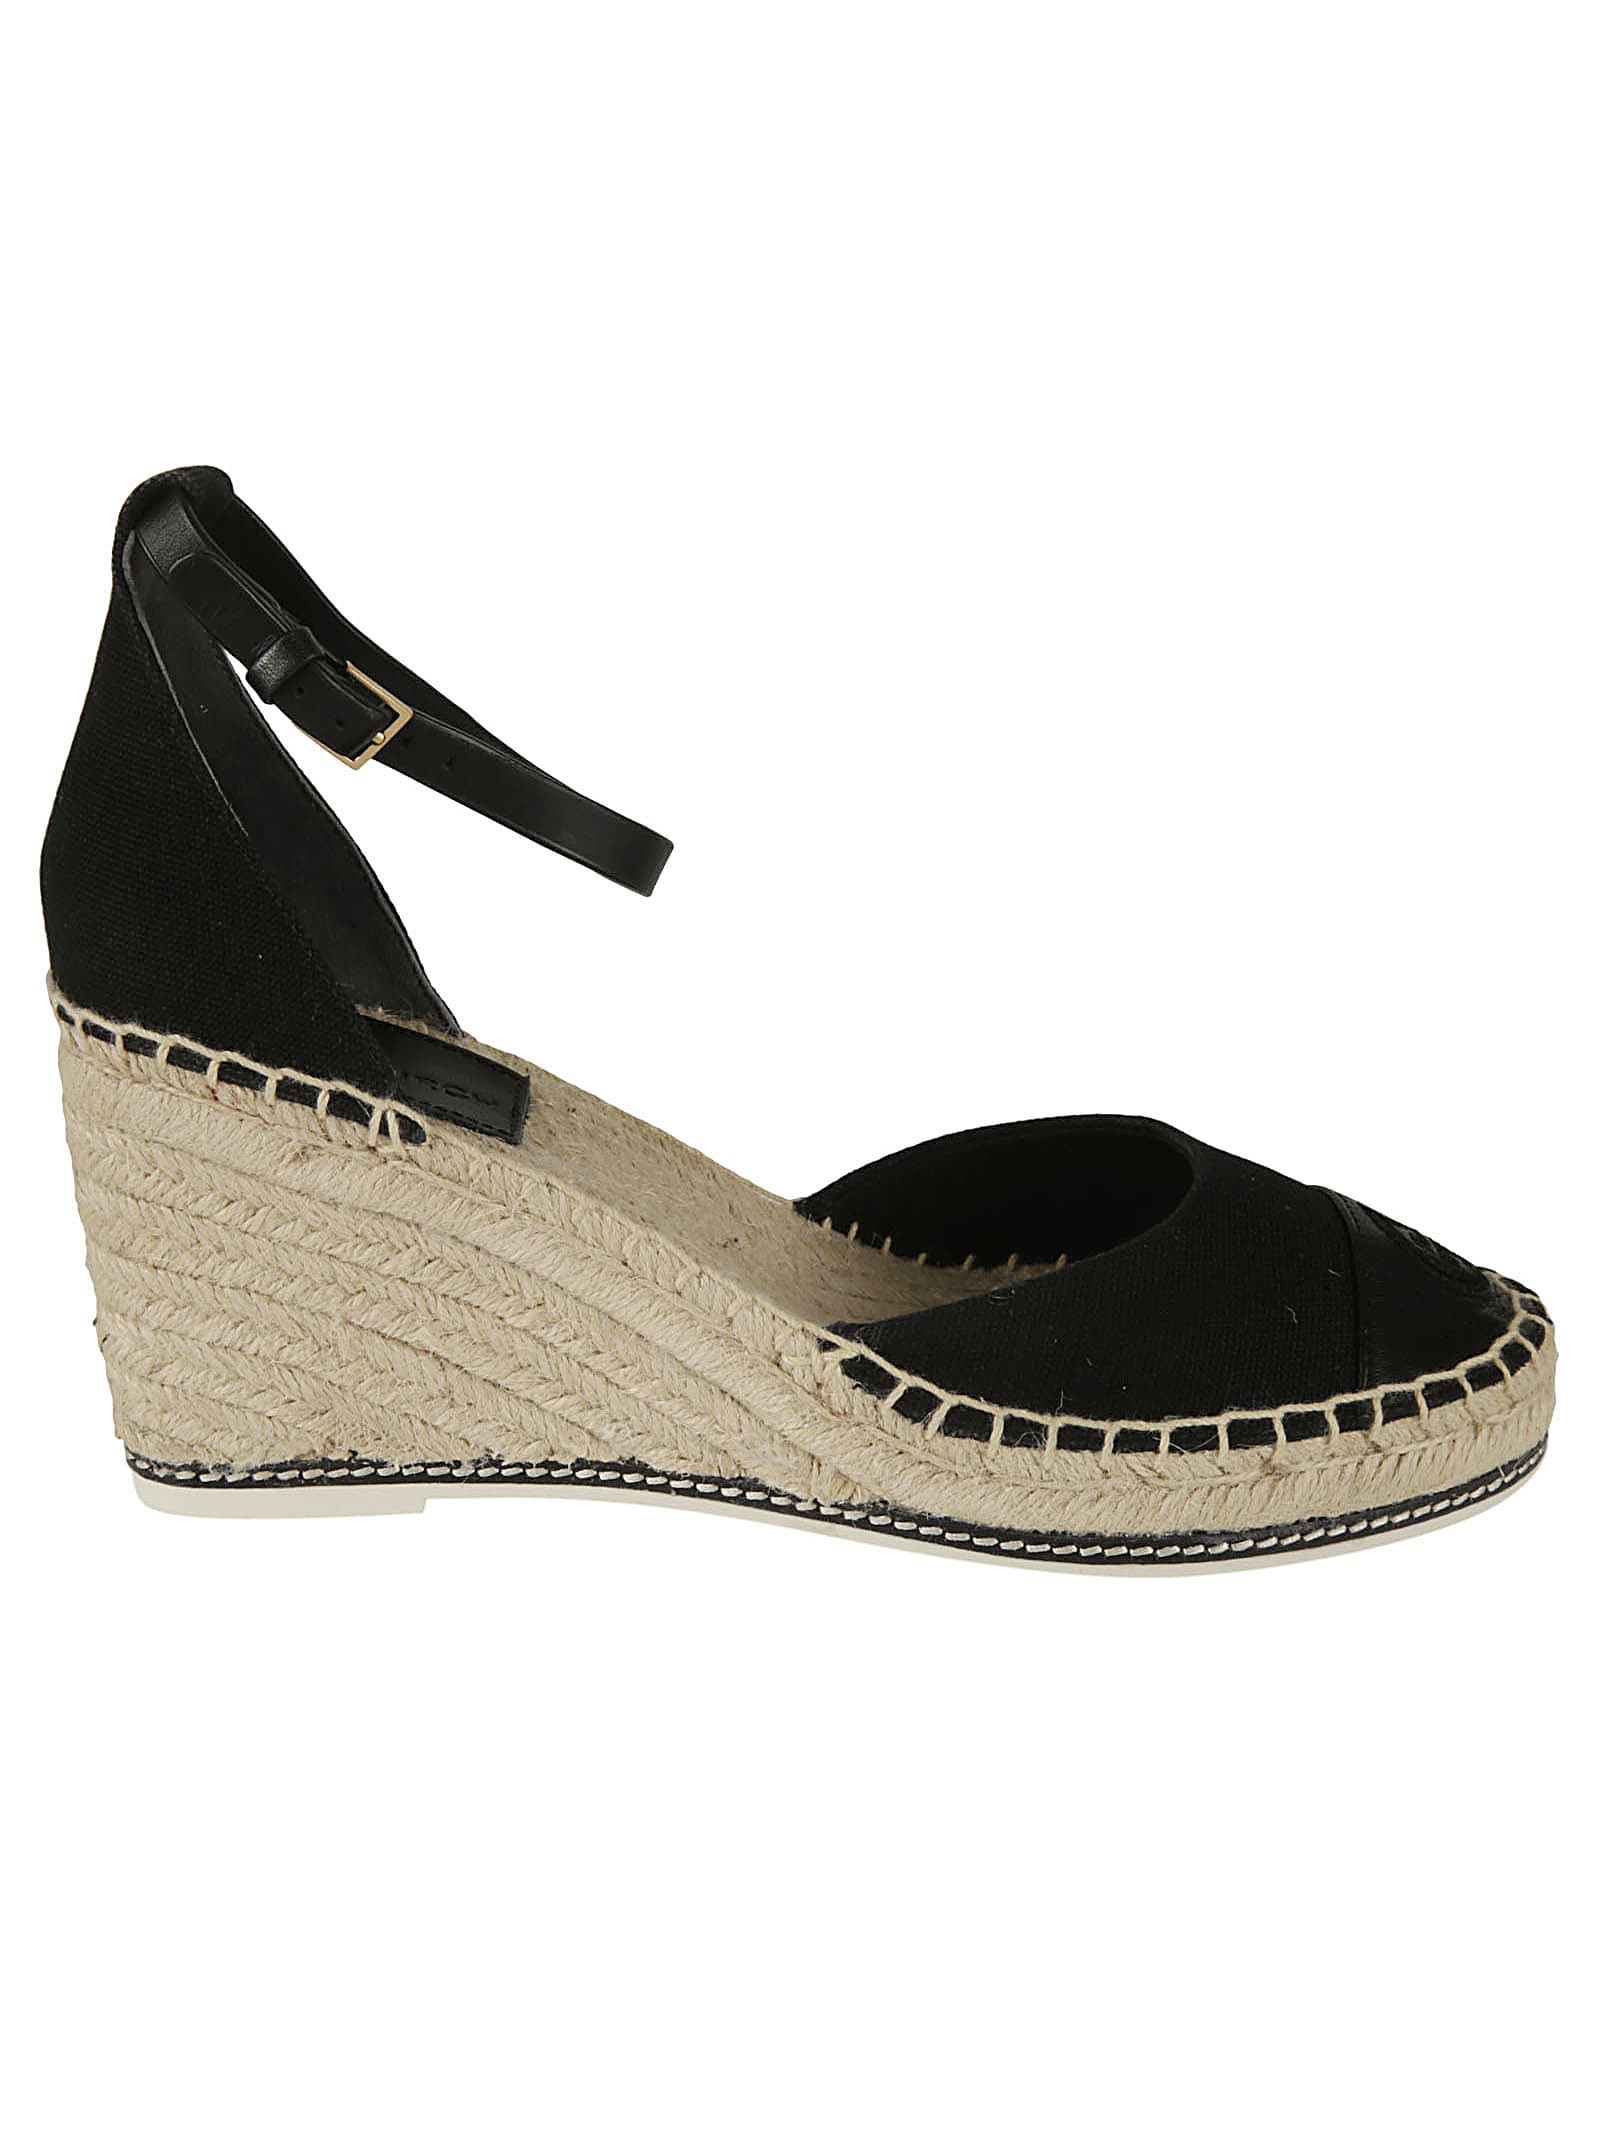 Tory Burch Color Block Wedge Sandals In Perfect Black | ModeSens